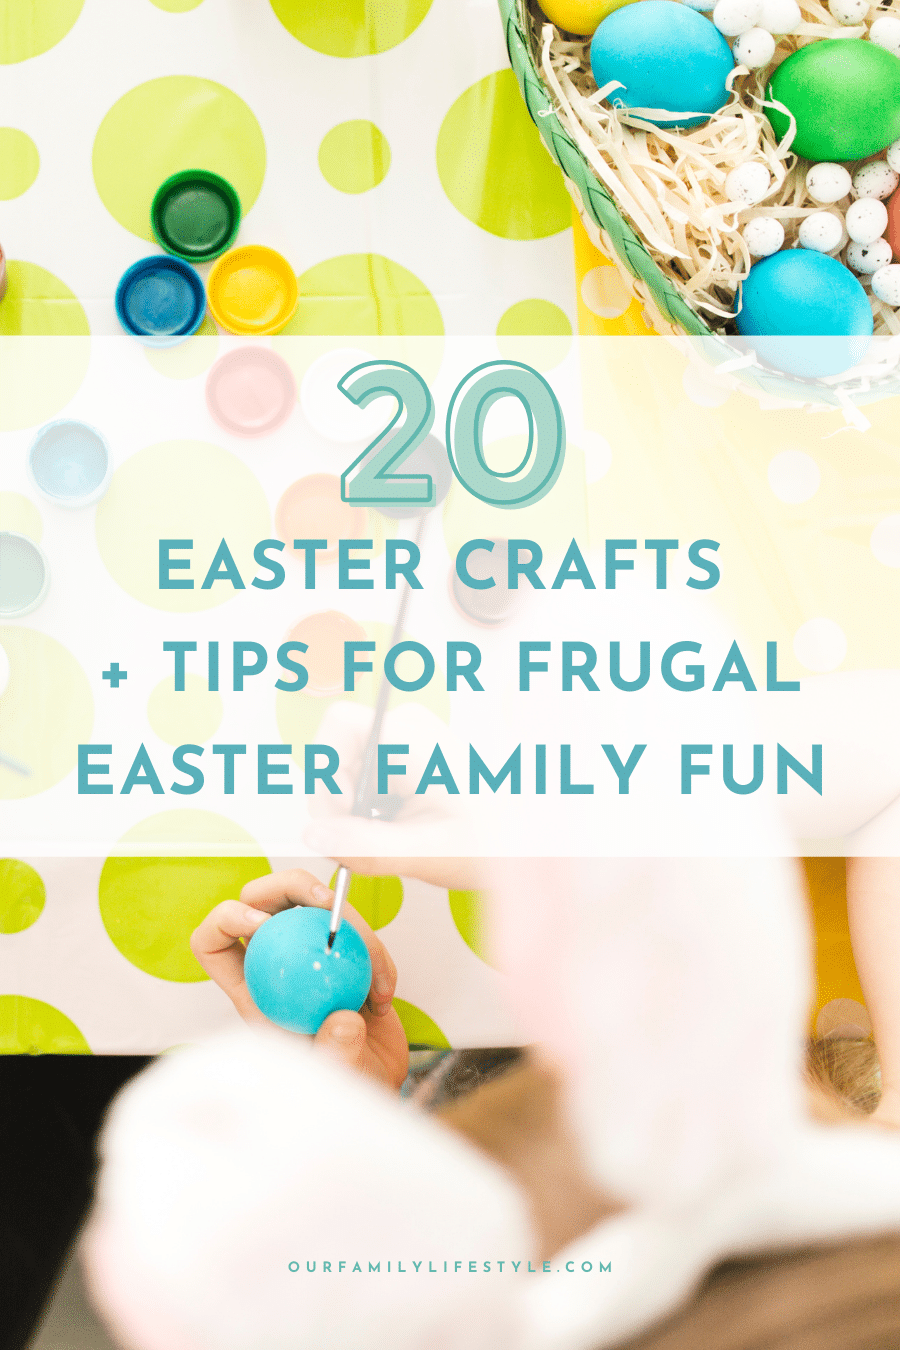 20 Easter Crafts + Tips for Frugal Easter Family Fun